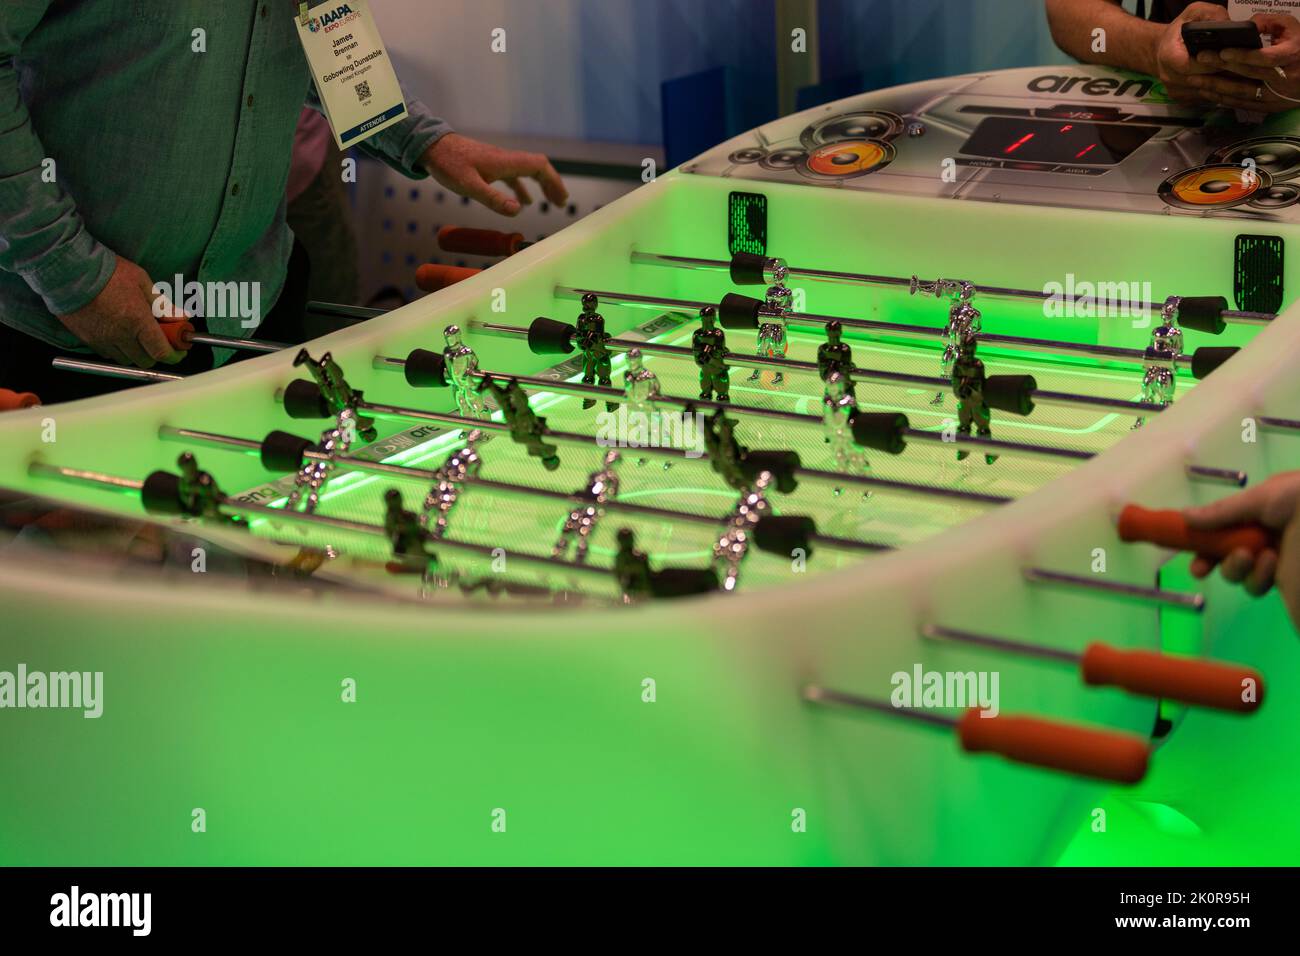 London, UK. 13th Sep, 2022. IAAPA Expo Europe (Global Association for the Attractions Industry) Excel London table football Credit: Ian Davidson/Alamy Live News Stock Photo